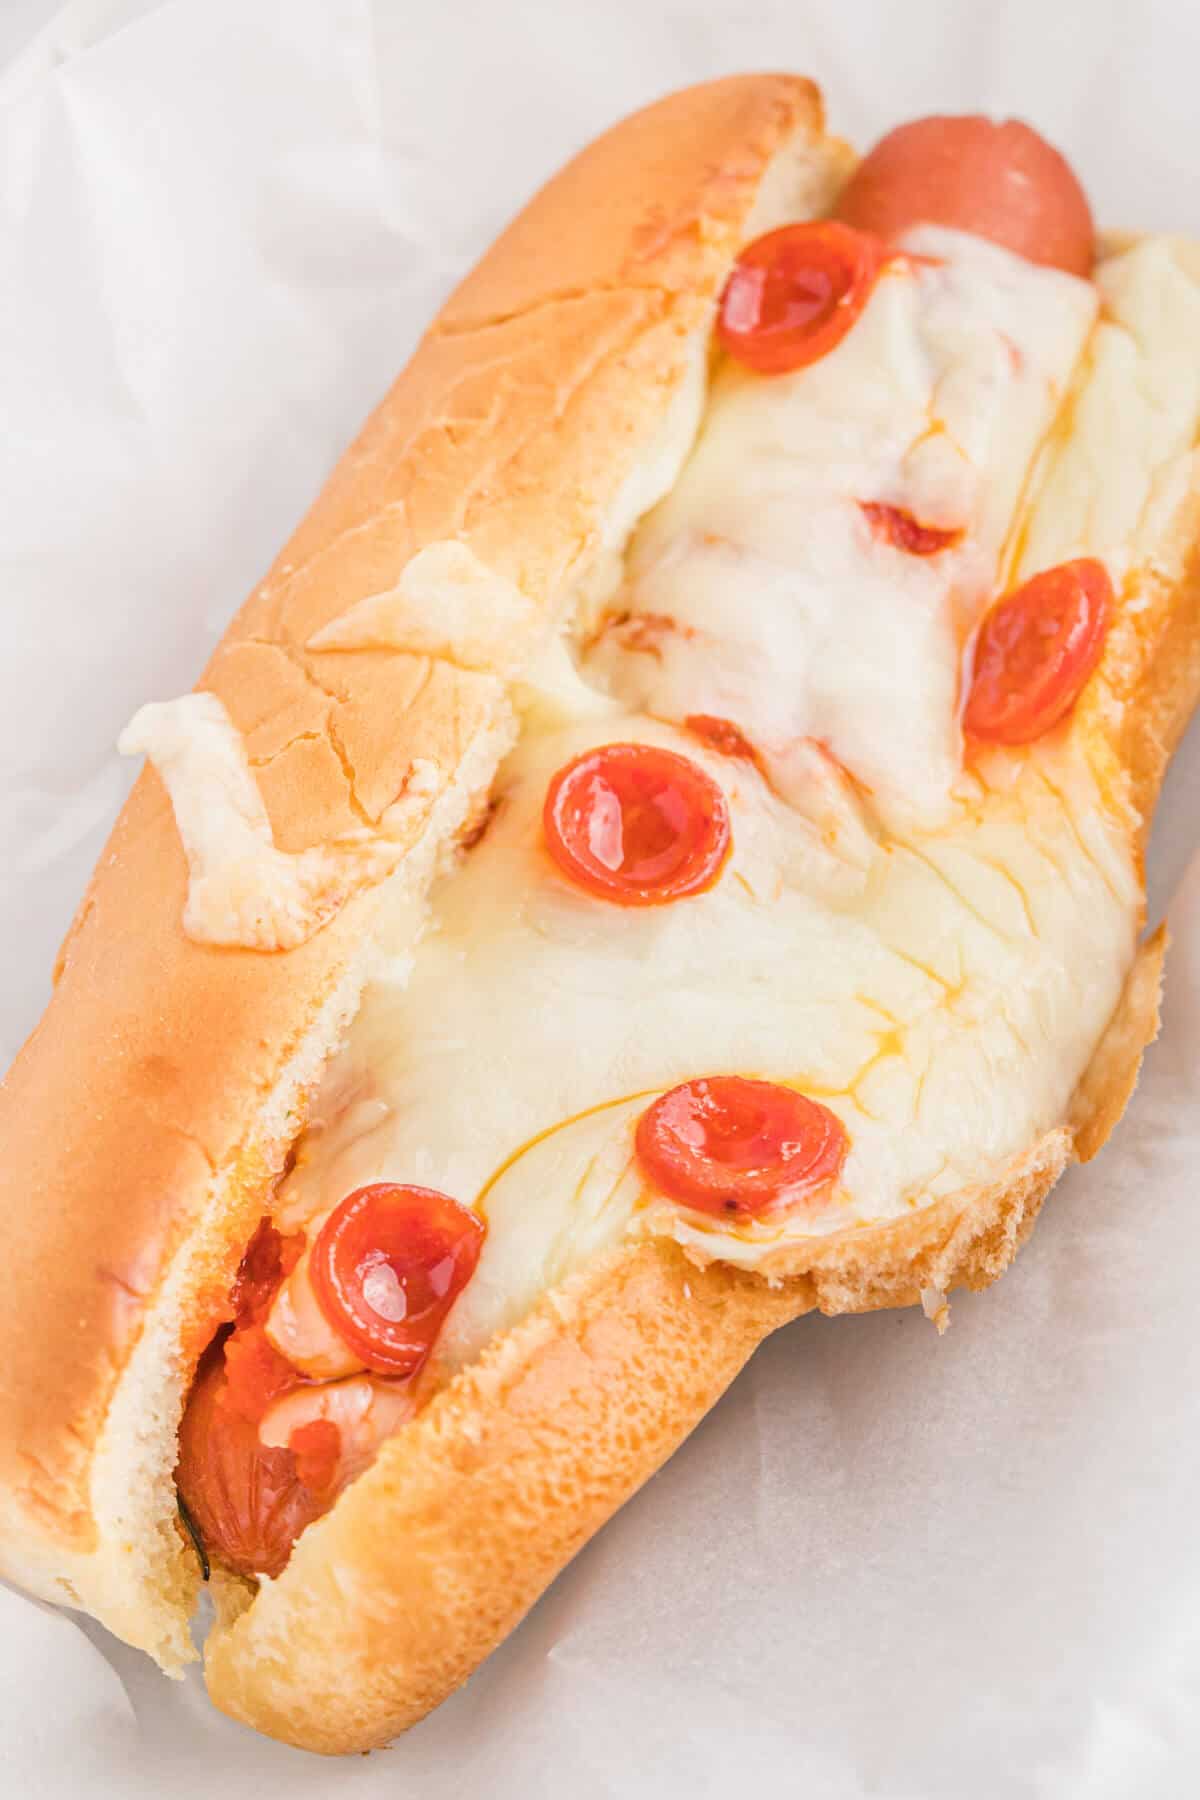 A pizza hot dog on a plate.